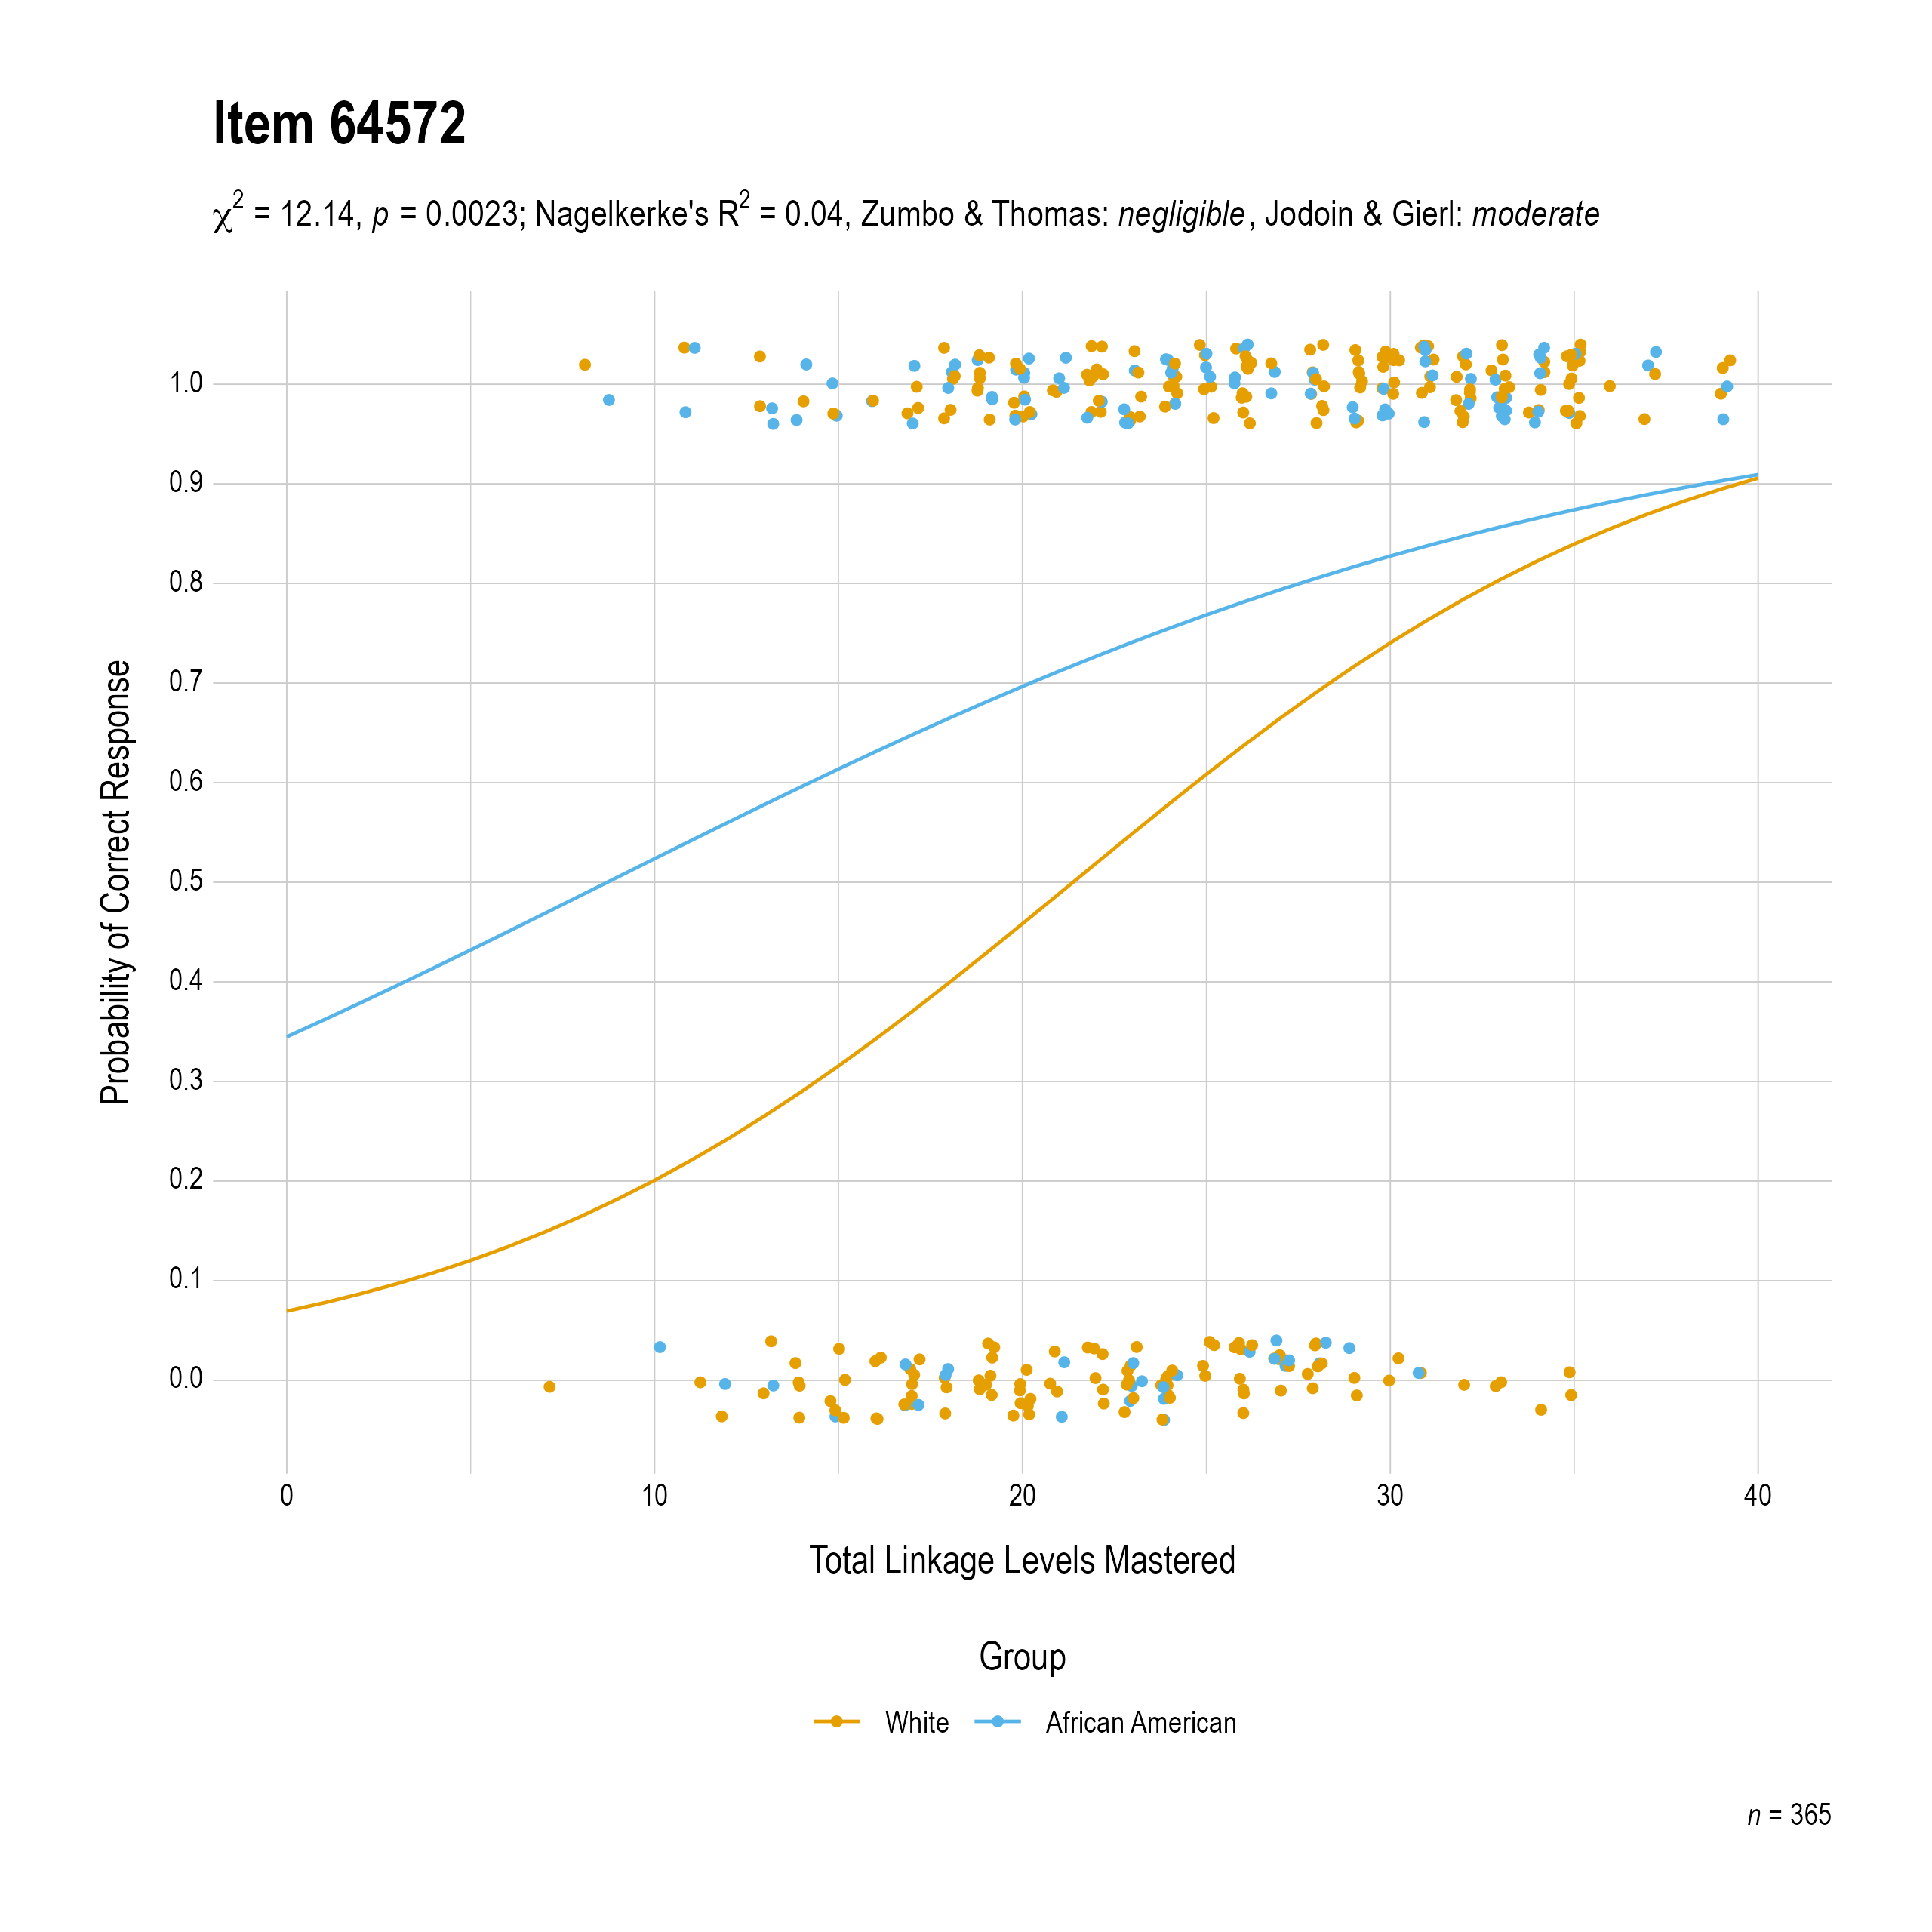 The plot of the combined race differential item function evidence for Mathematics item 64572. The figure contains points shaded by group. The figure also contains a logistic regression curve for each group. The total linkage levels mastered in is on the x-axis, and the probability of a correct response is on the y-axis.